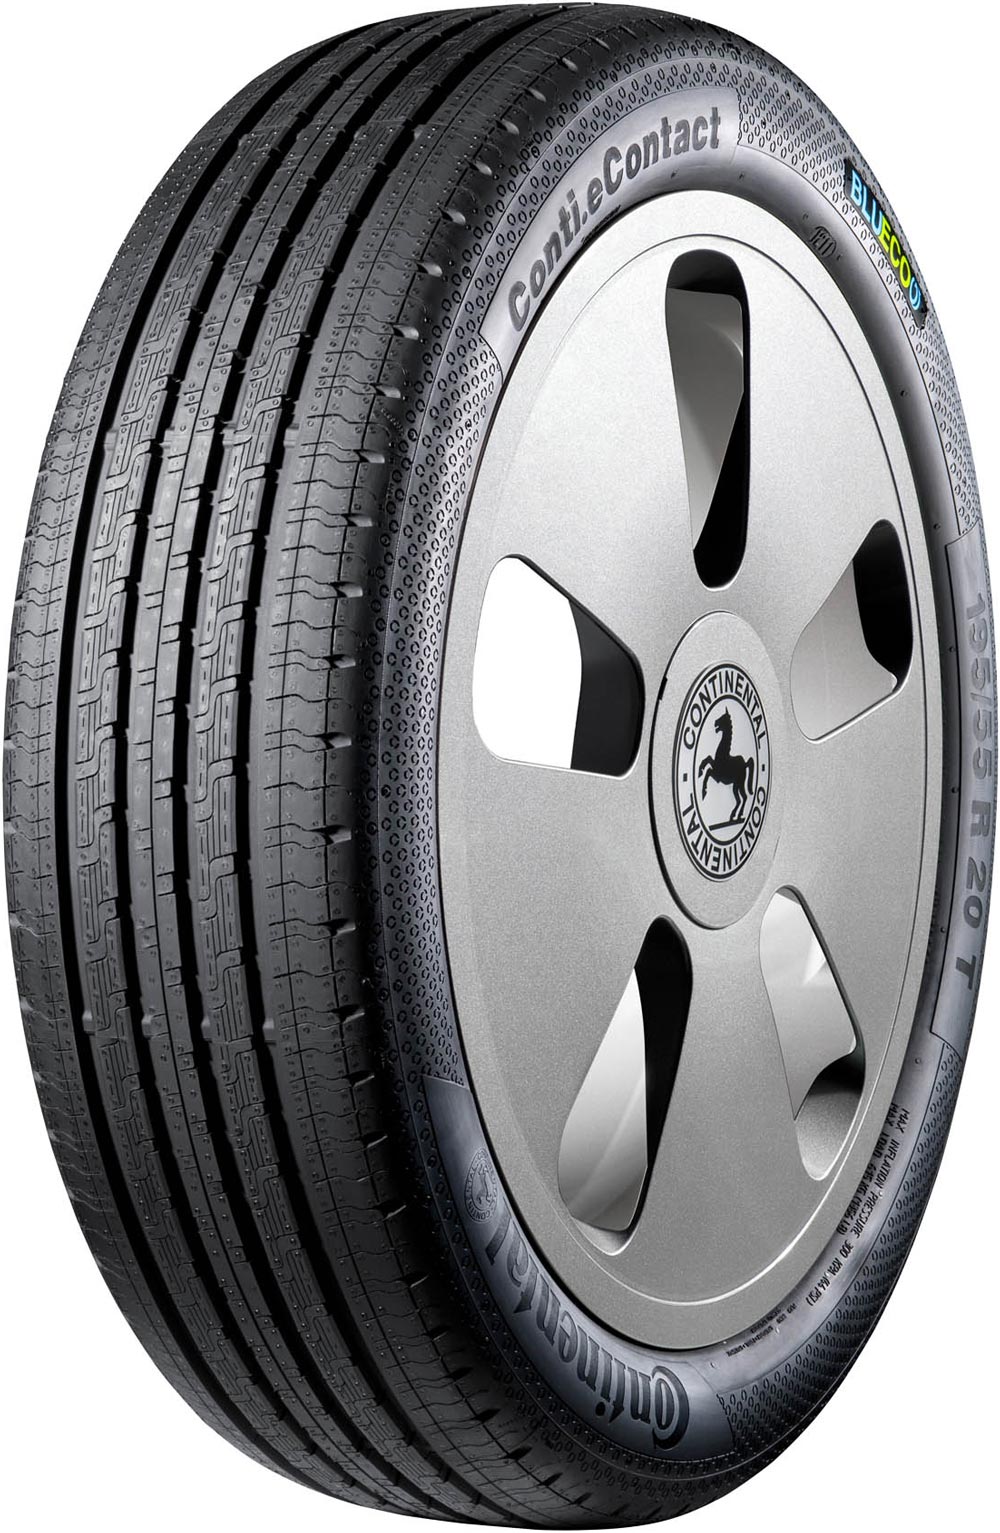 Anvelope auto CONTINENTAL Conti eContact 145/80 R13 75M